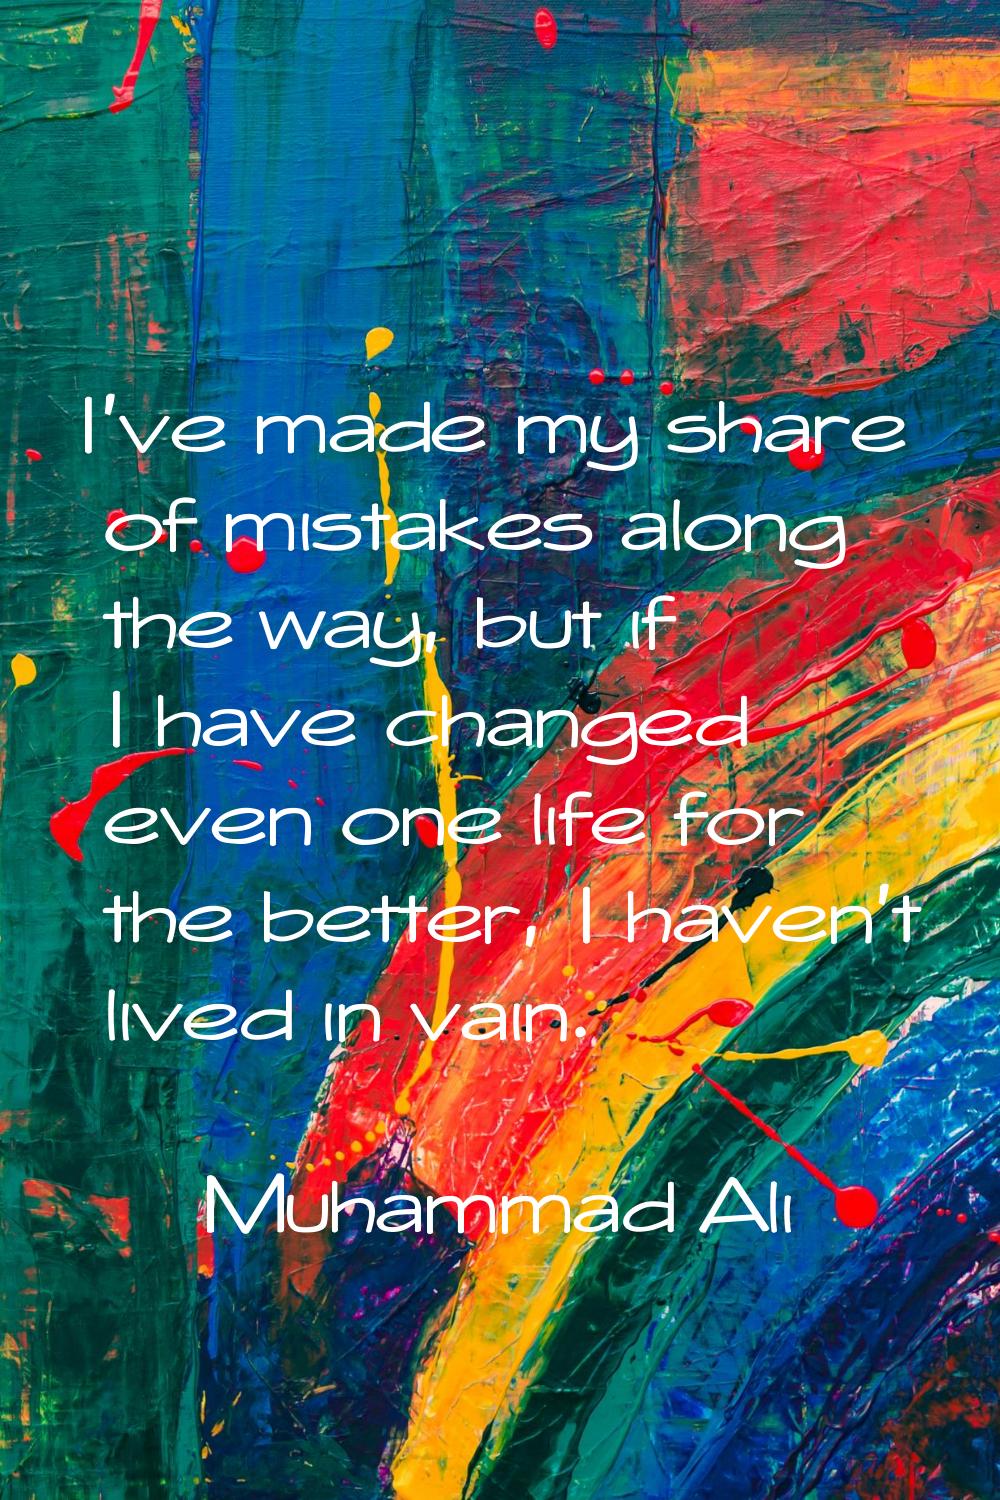 I've made my share of mistakes along the way, but if I have changed even one life for the better, I